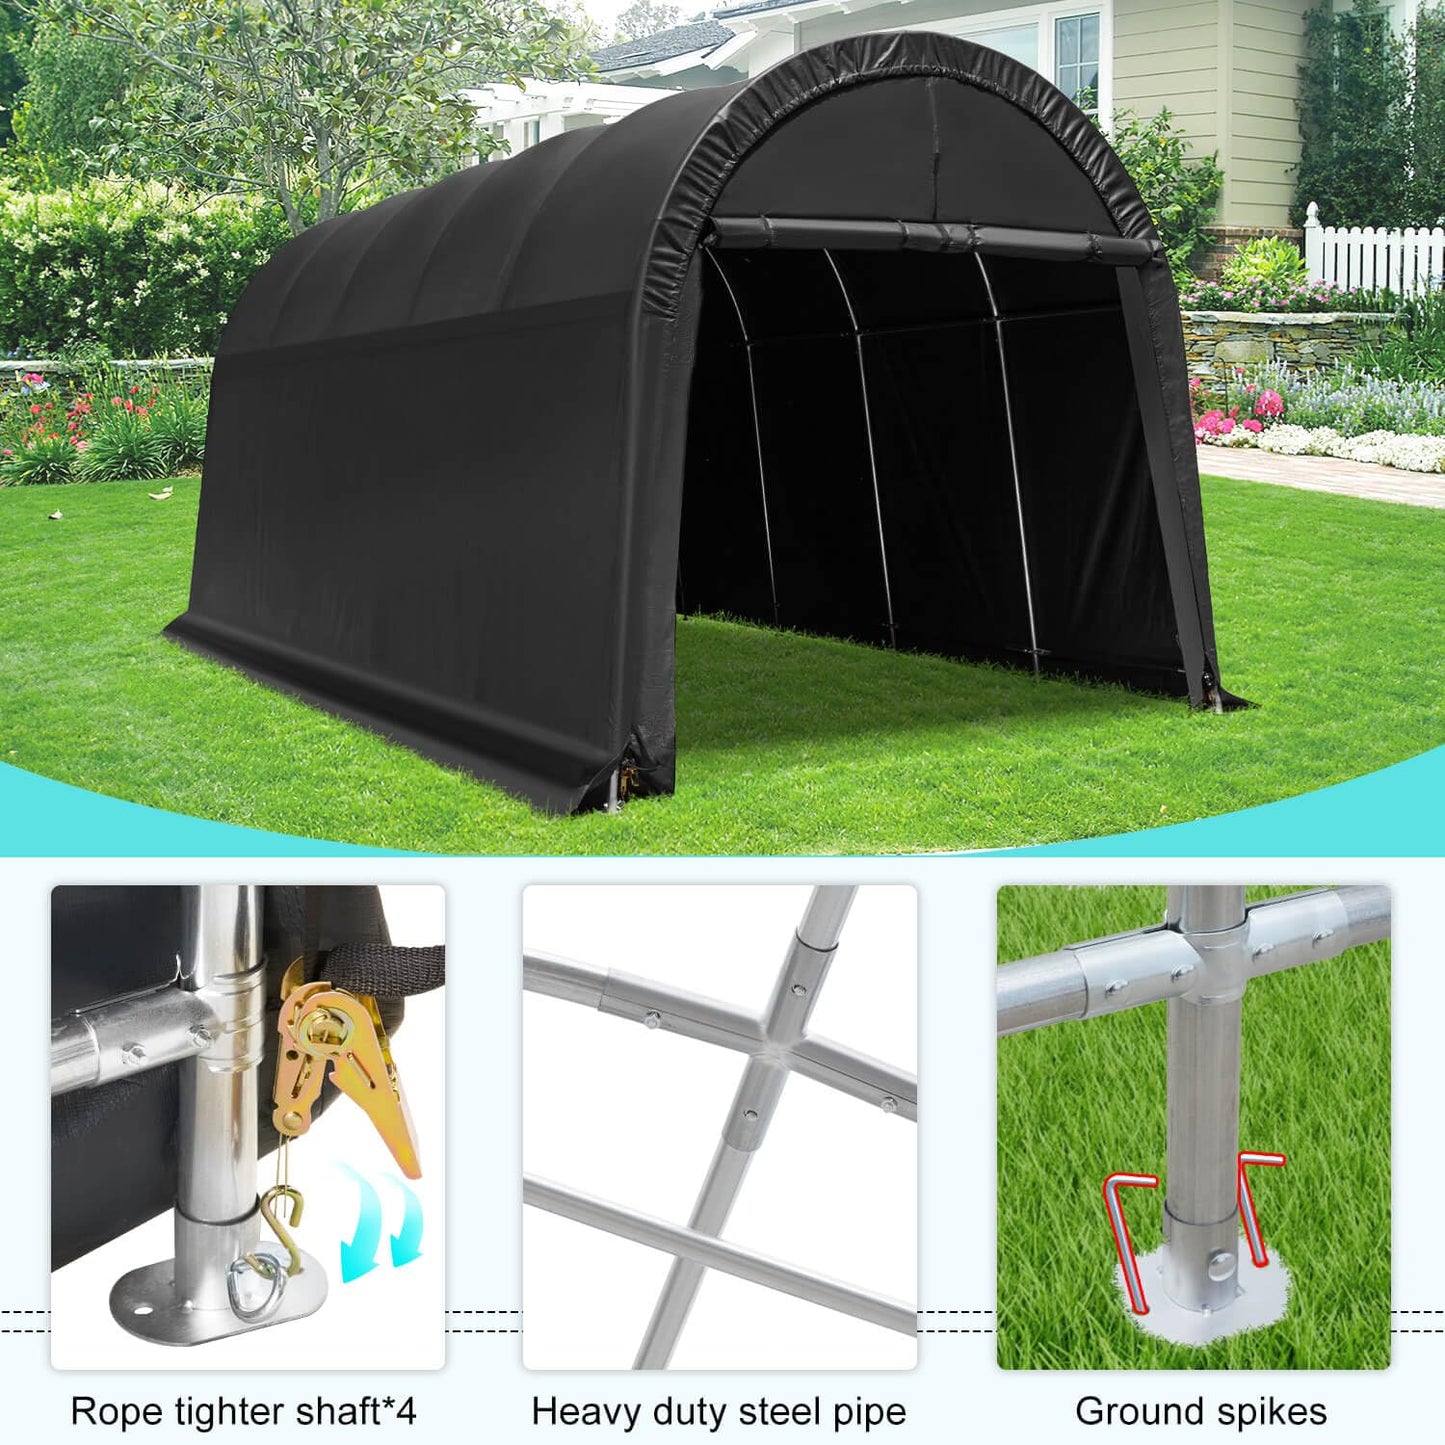 MELLCOM Portable Garage, 12' x 20' x 9.8' Heavy Duty Carport with All-Steel Metal Frame and Round Style Roof, Anti-Snow Car Canopy for Car, Truck, Boat 12'x20'